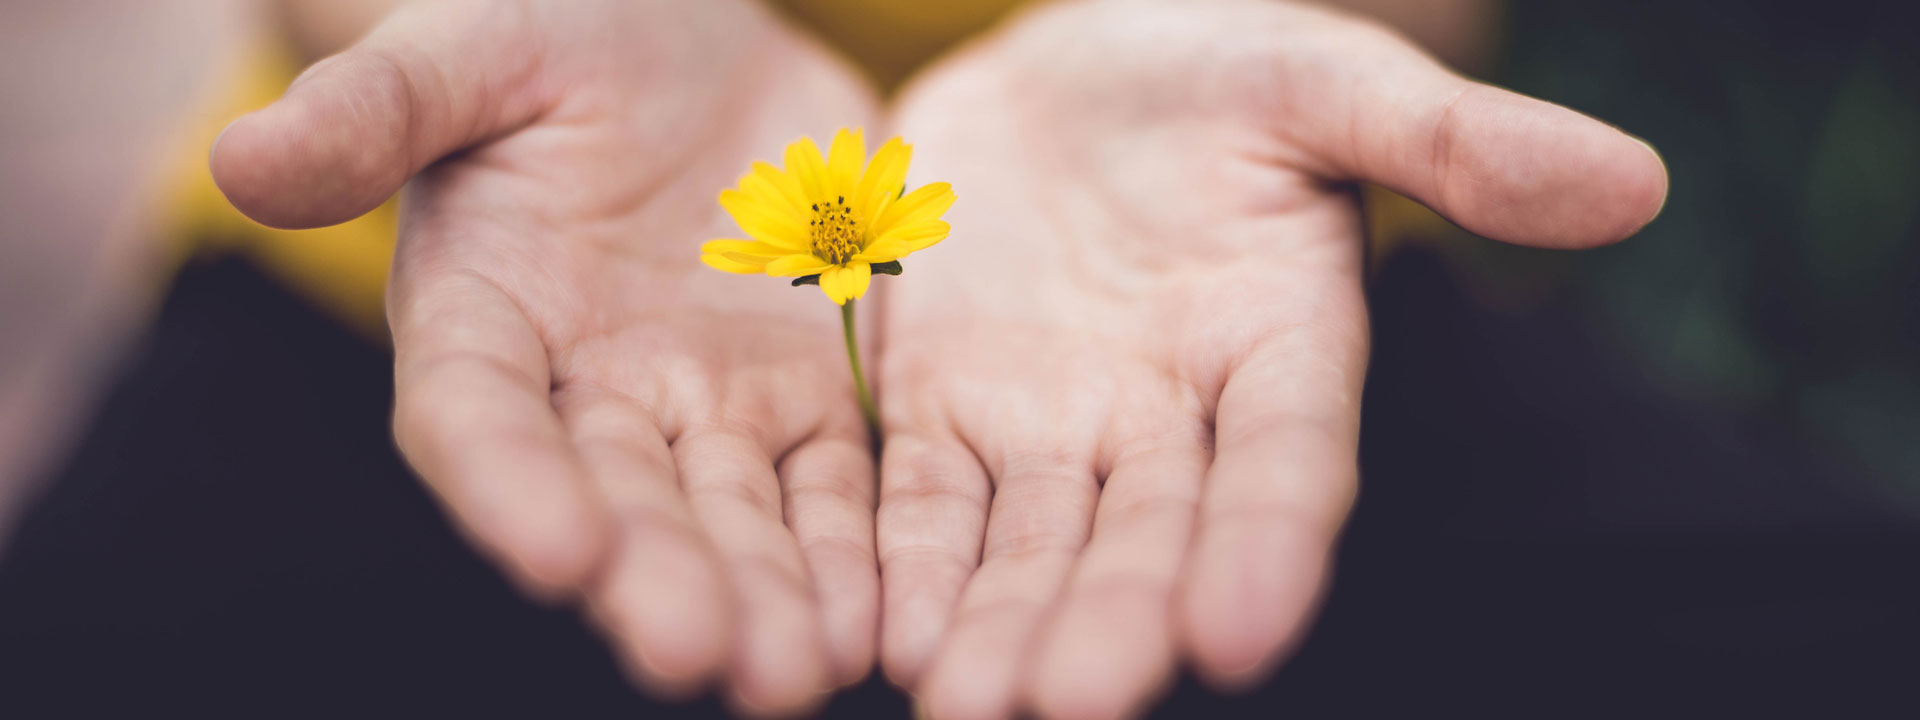 A pair of open hands with a yellow flower poking through the middle.